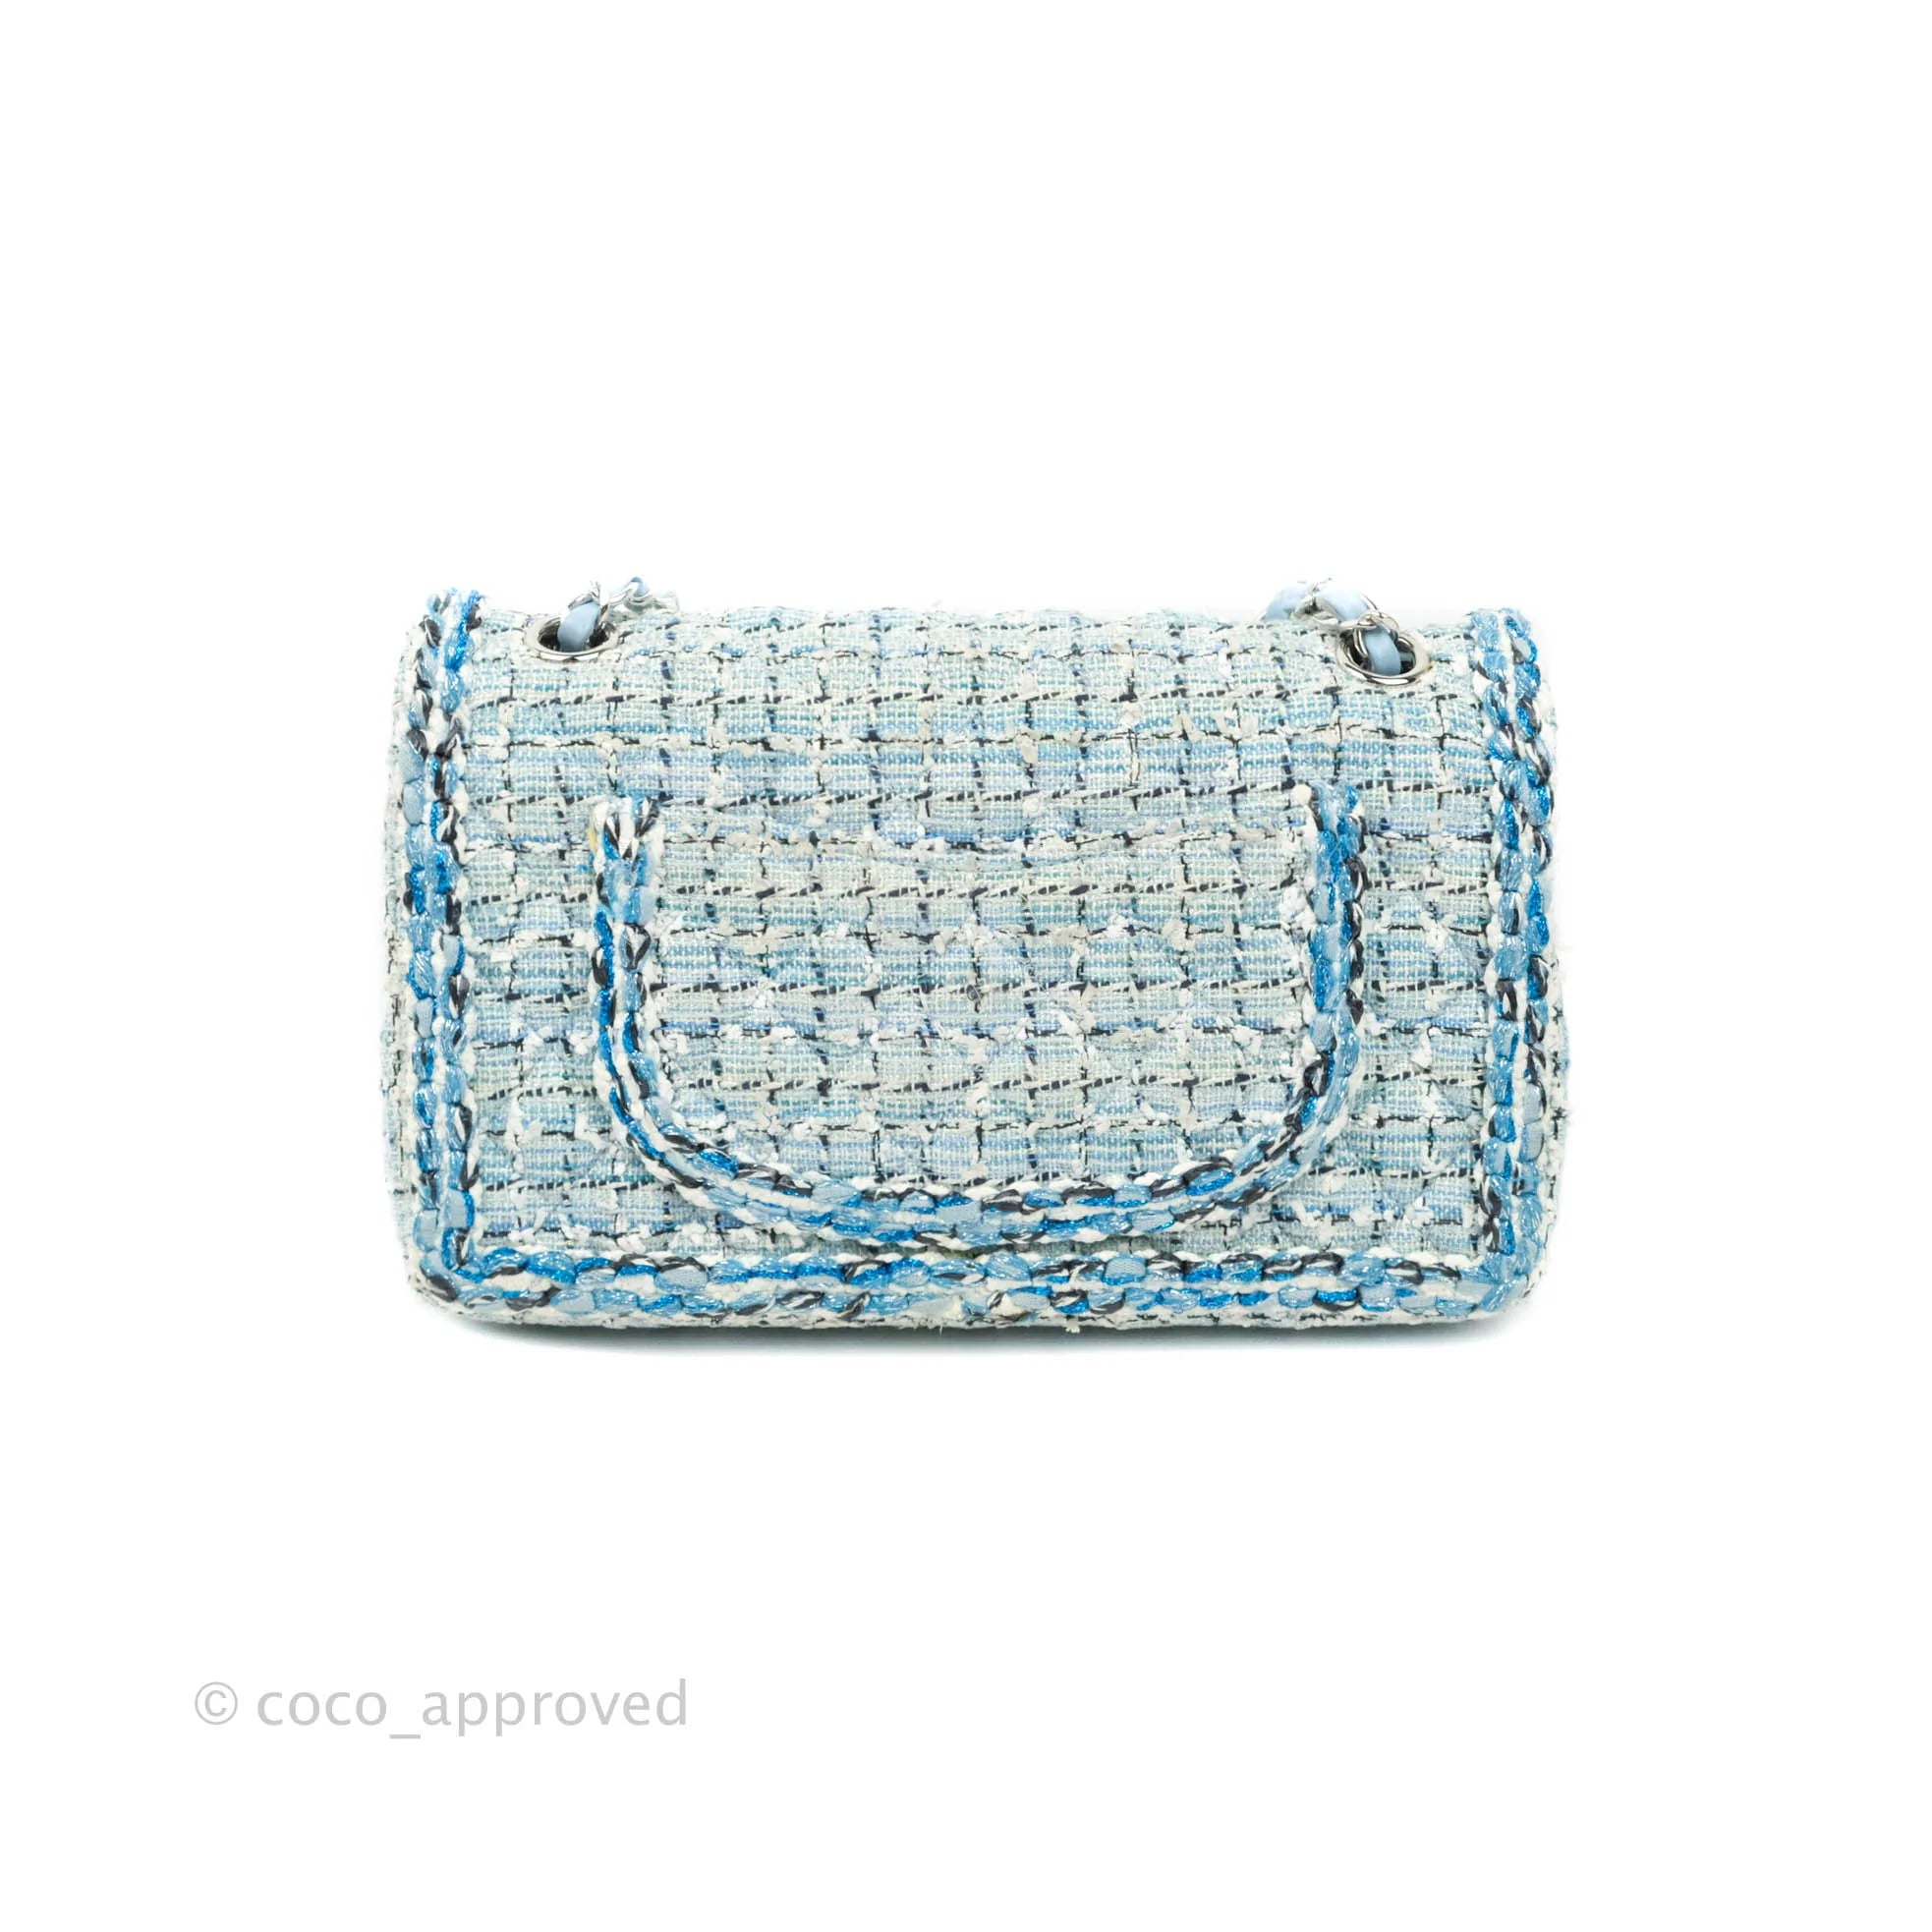 CHANEL Tweed Quilted Medium Chanel 19 Flap Blue Pink 1284677